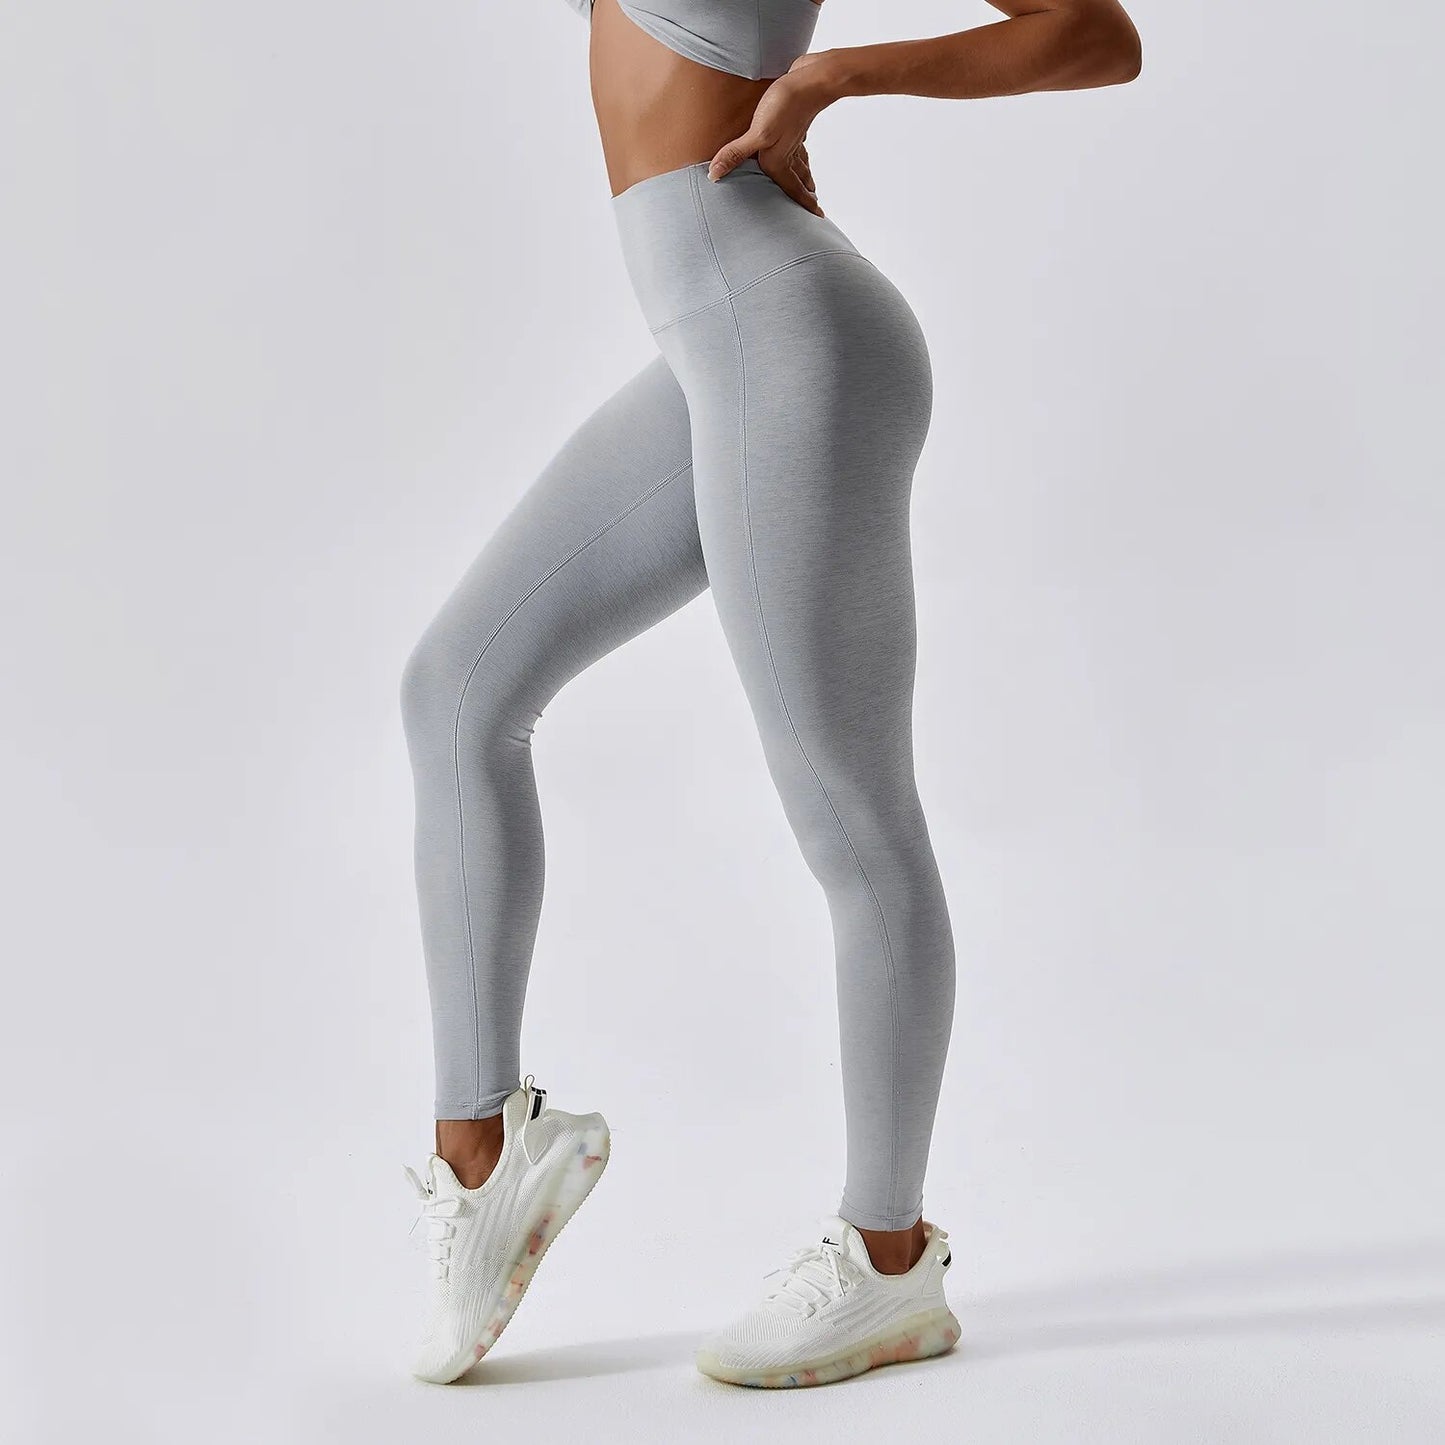 New Buttery Soft White Yoga Pants